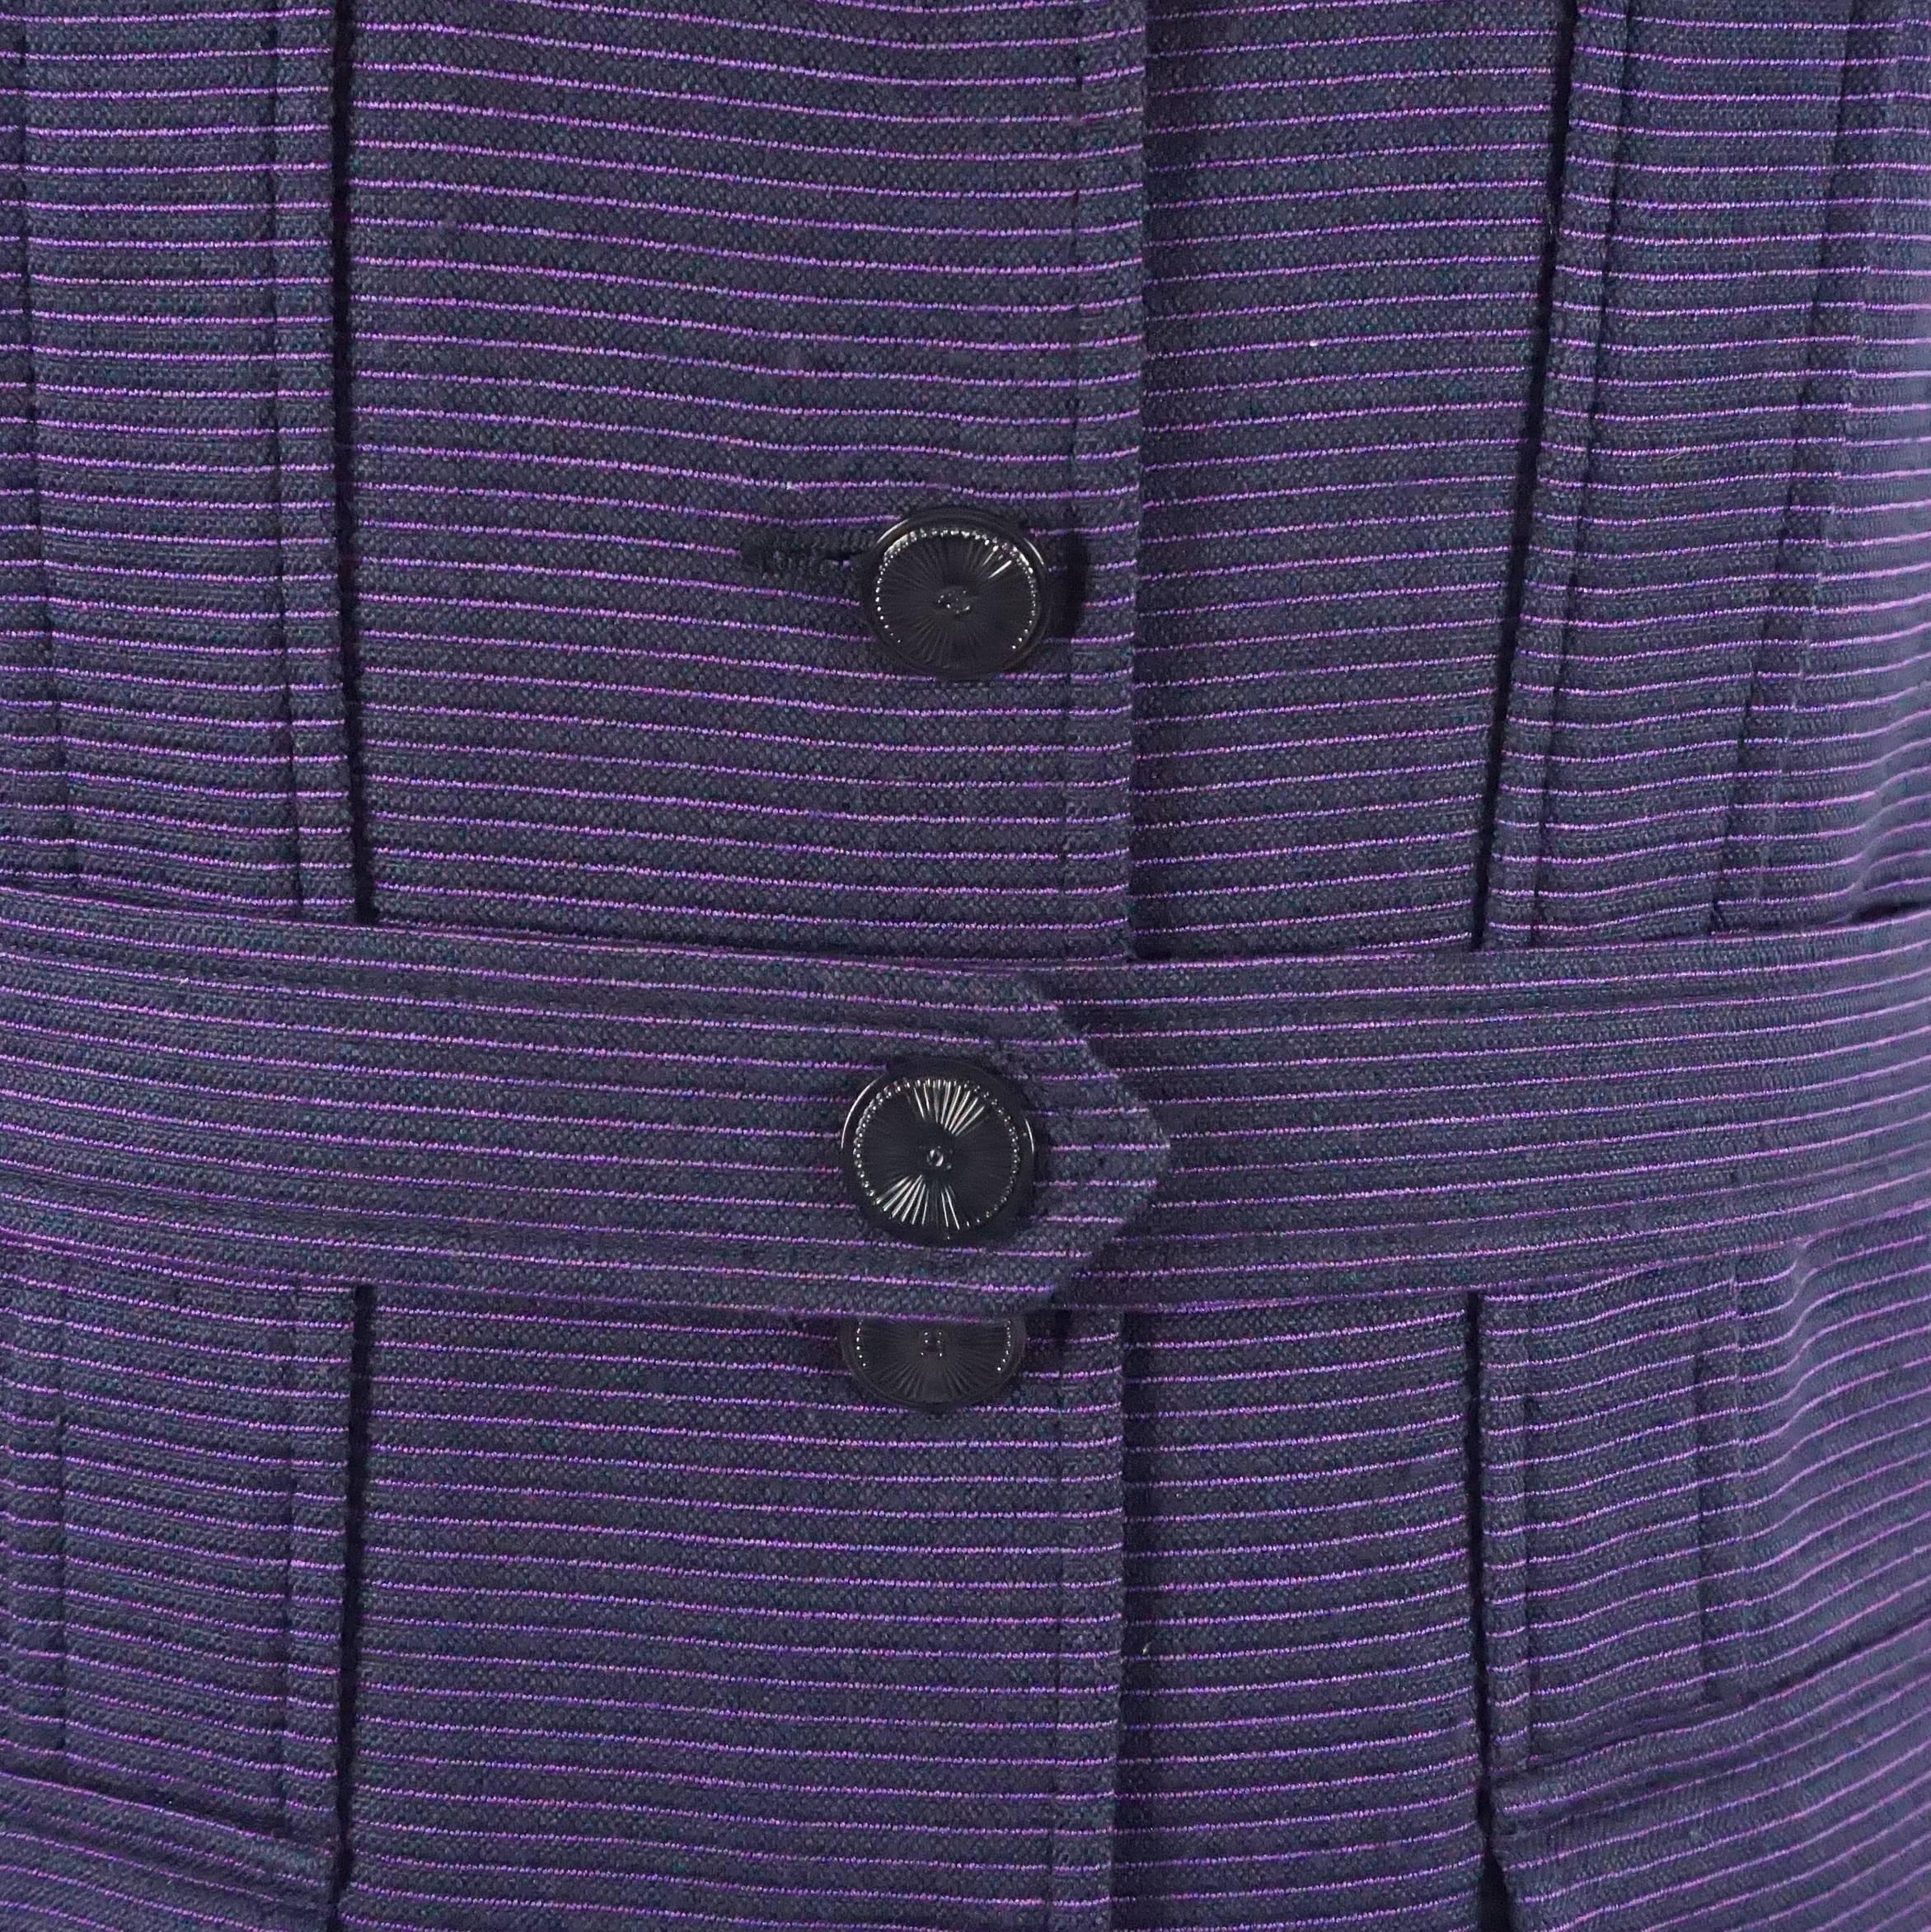 Chanel Spring 2001 Purple Two Toned Wool/Silk Blend Ribbed Skirt Suit - Size 40 In Good Condition For Sale In West Palm Beach, FL